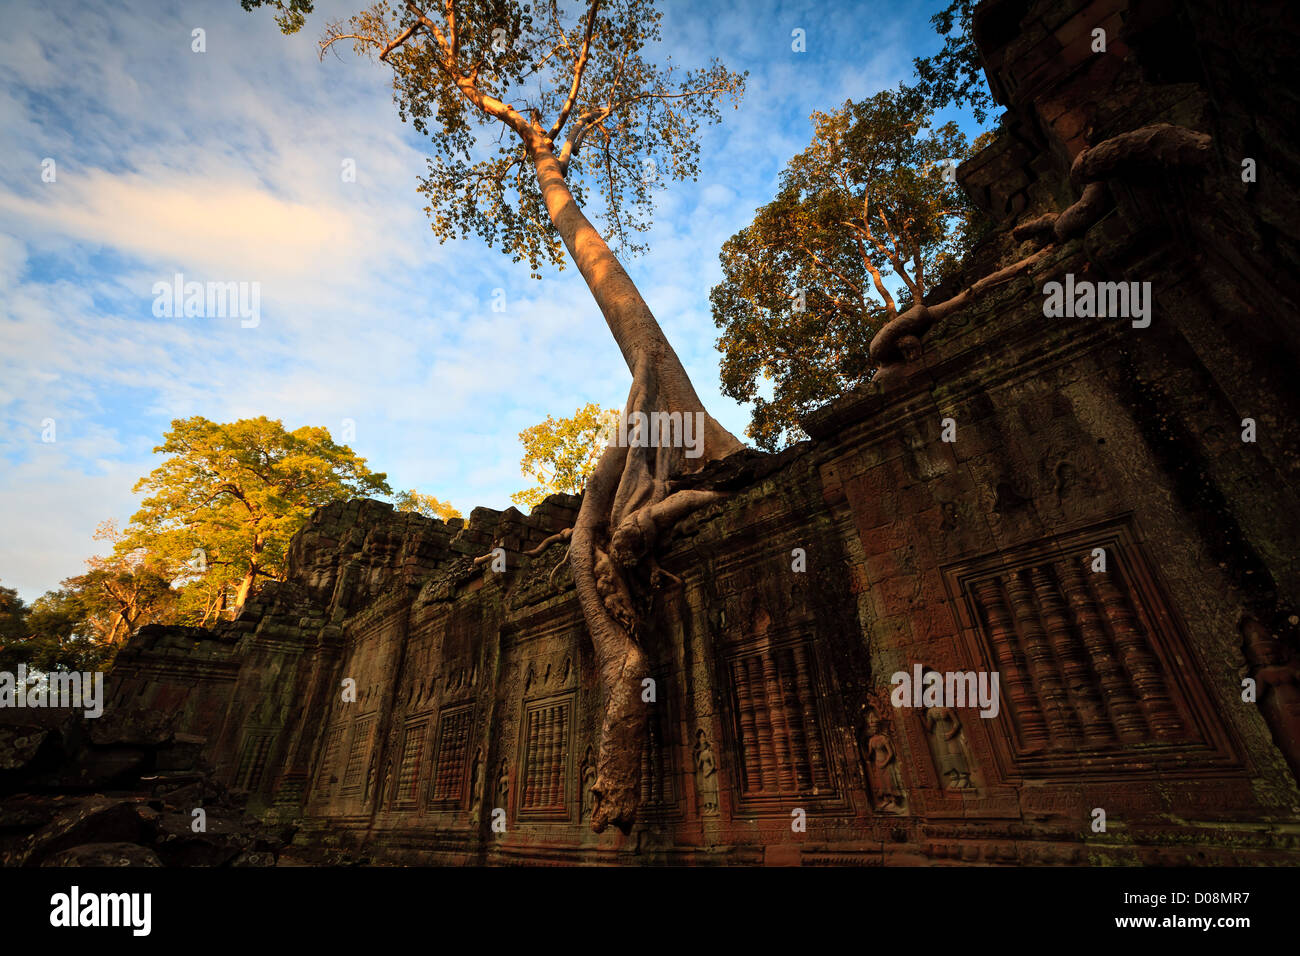 A tree grows on top down the sides of a temple wall at the ruins in Angkor Wat SIEM REAP, CAMBODIA, UNESCO World Heritage Site Stock Photo